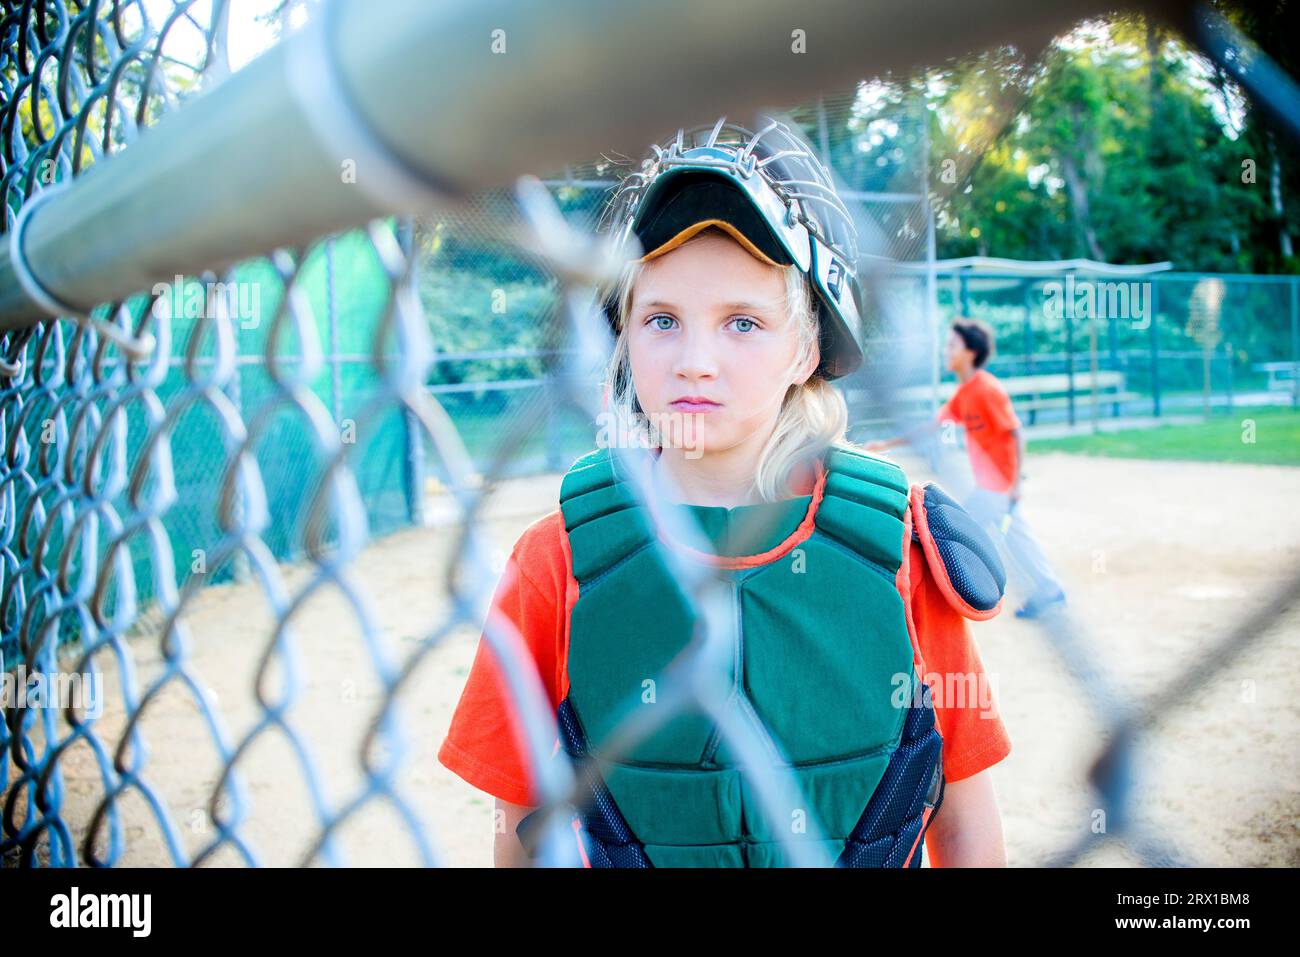 A  portrait of a 10 year old  girl who is the catcher on the team Stock Photo